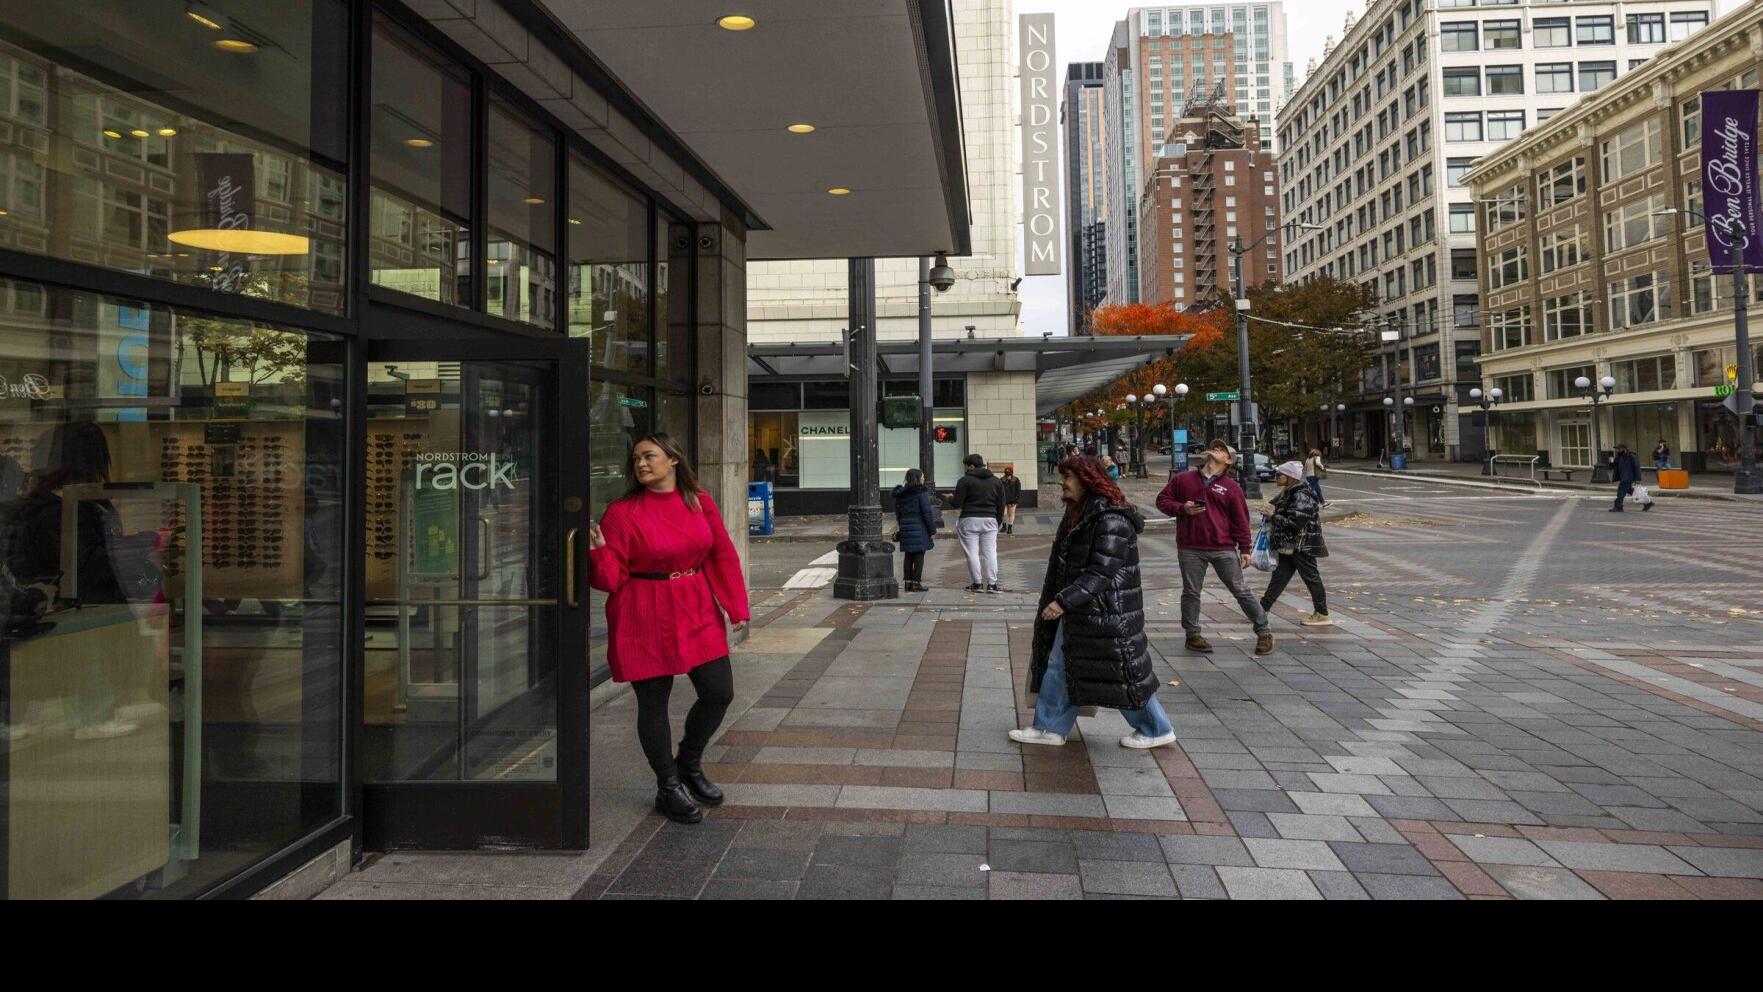 Nordstrom's Seattle flagship store stands the test of time, city issues